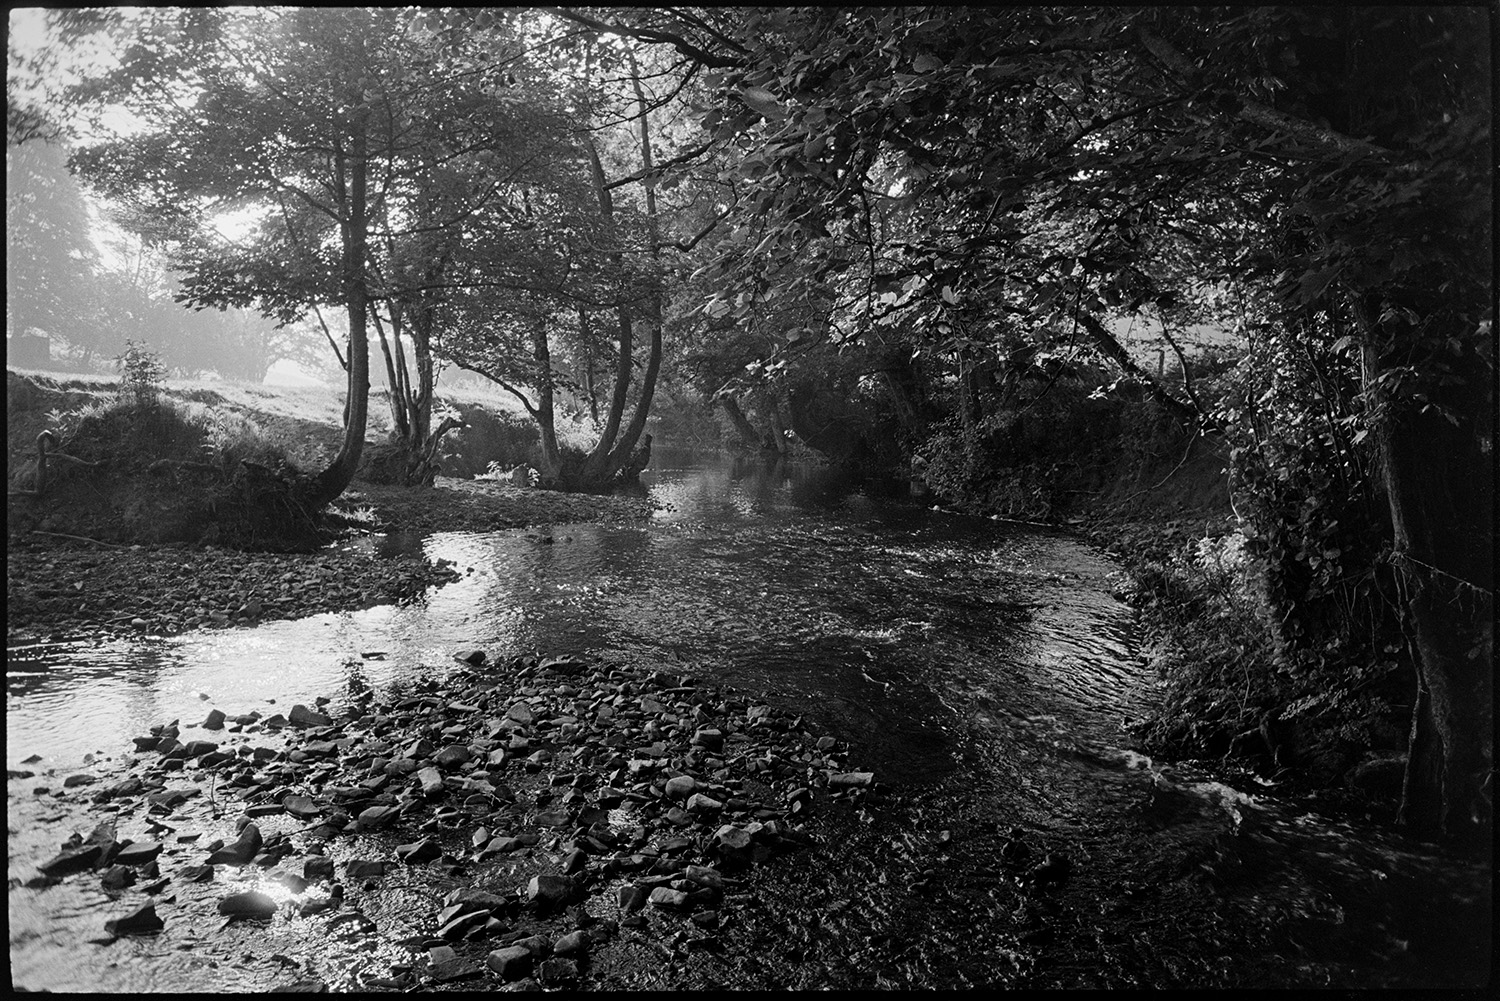 Rocky river with trees. Early morning mist.
[The River Taw with stony river bed flowing past river banks with trees at Eggesford.]